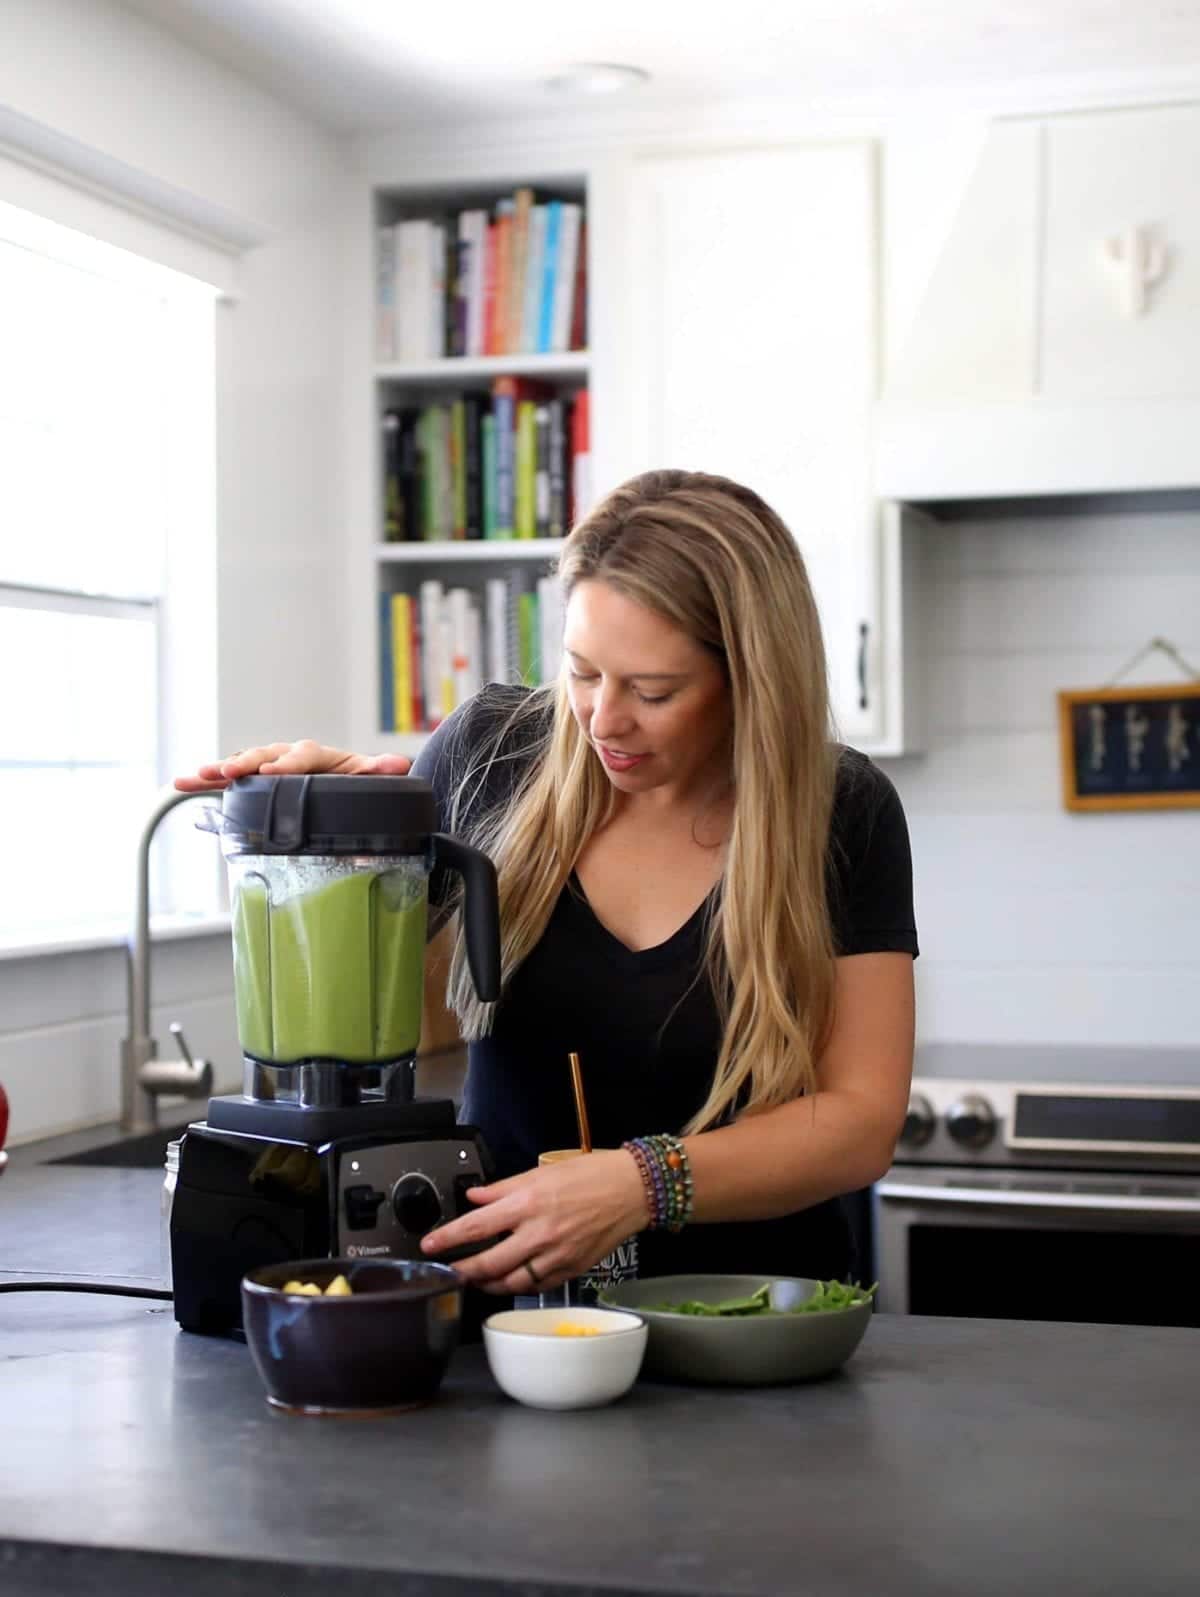 white woman using a Vitamix blender to blend a green smoothie in a kitchen.